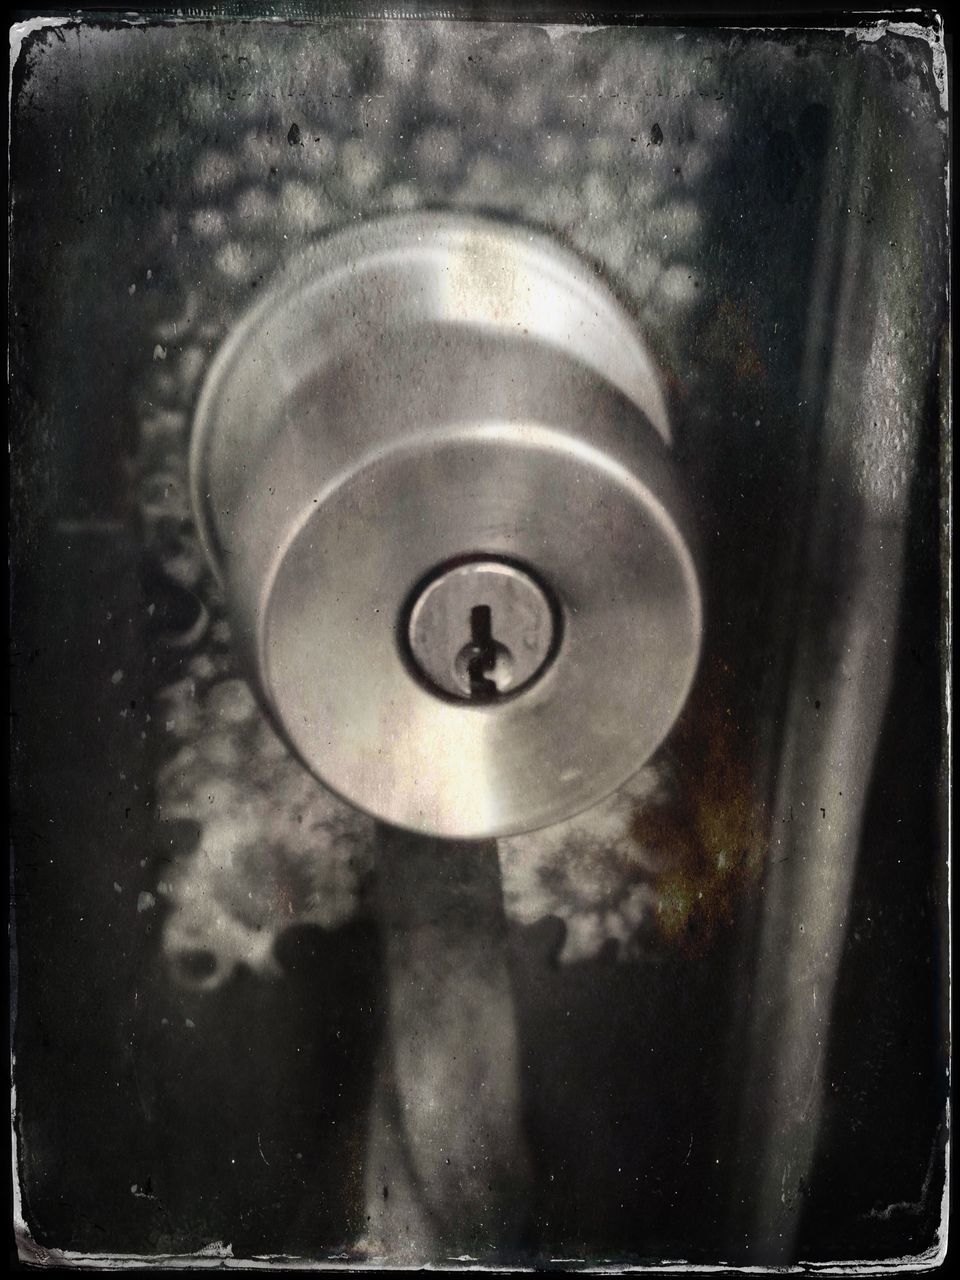 metal, close-up, no people, indoors, shape, circle, auto post production filter, geometric shape, transfer print, sink, old, selective focus, keyhole, focus on foreground, door, shiny, steel, design, control, household equipment, alloy, silver colored